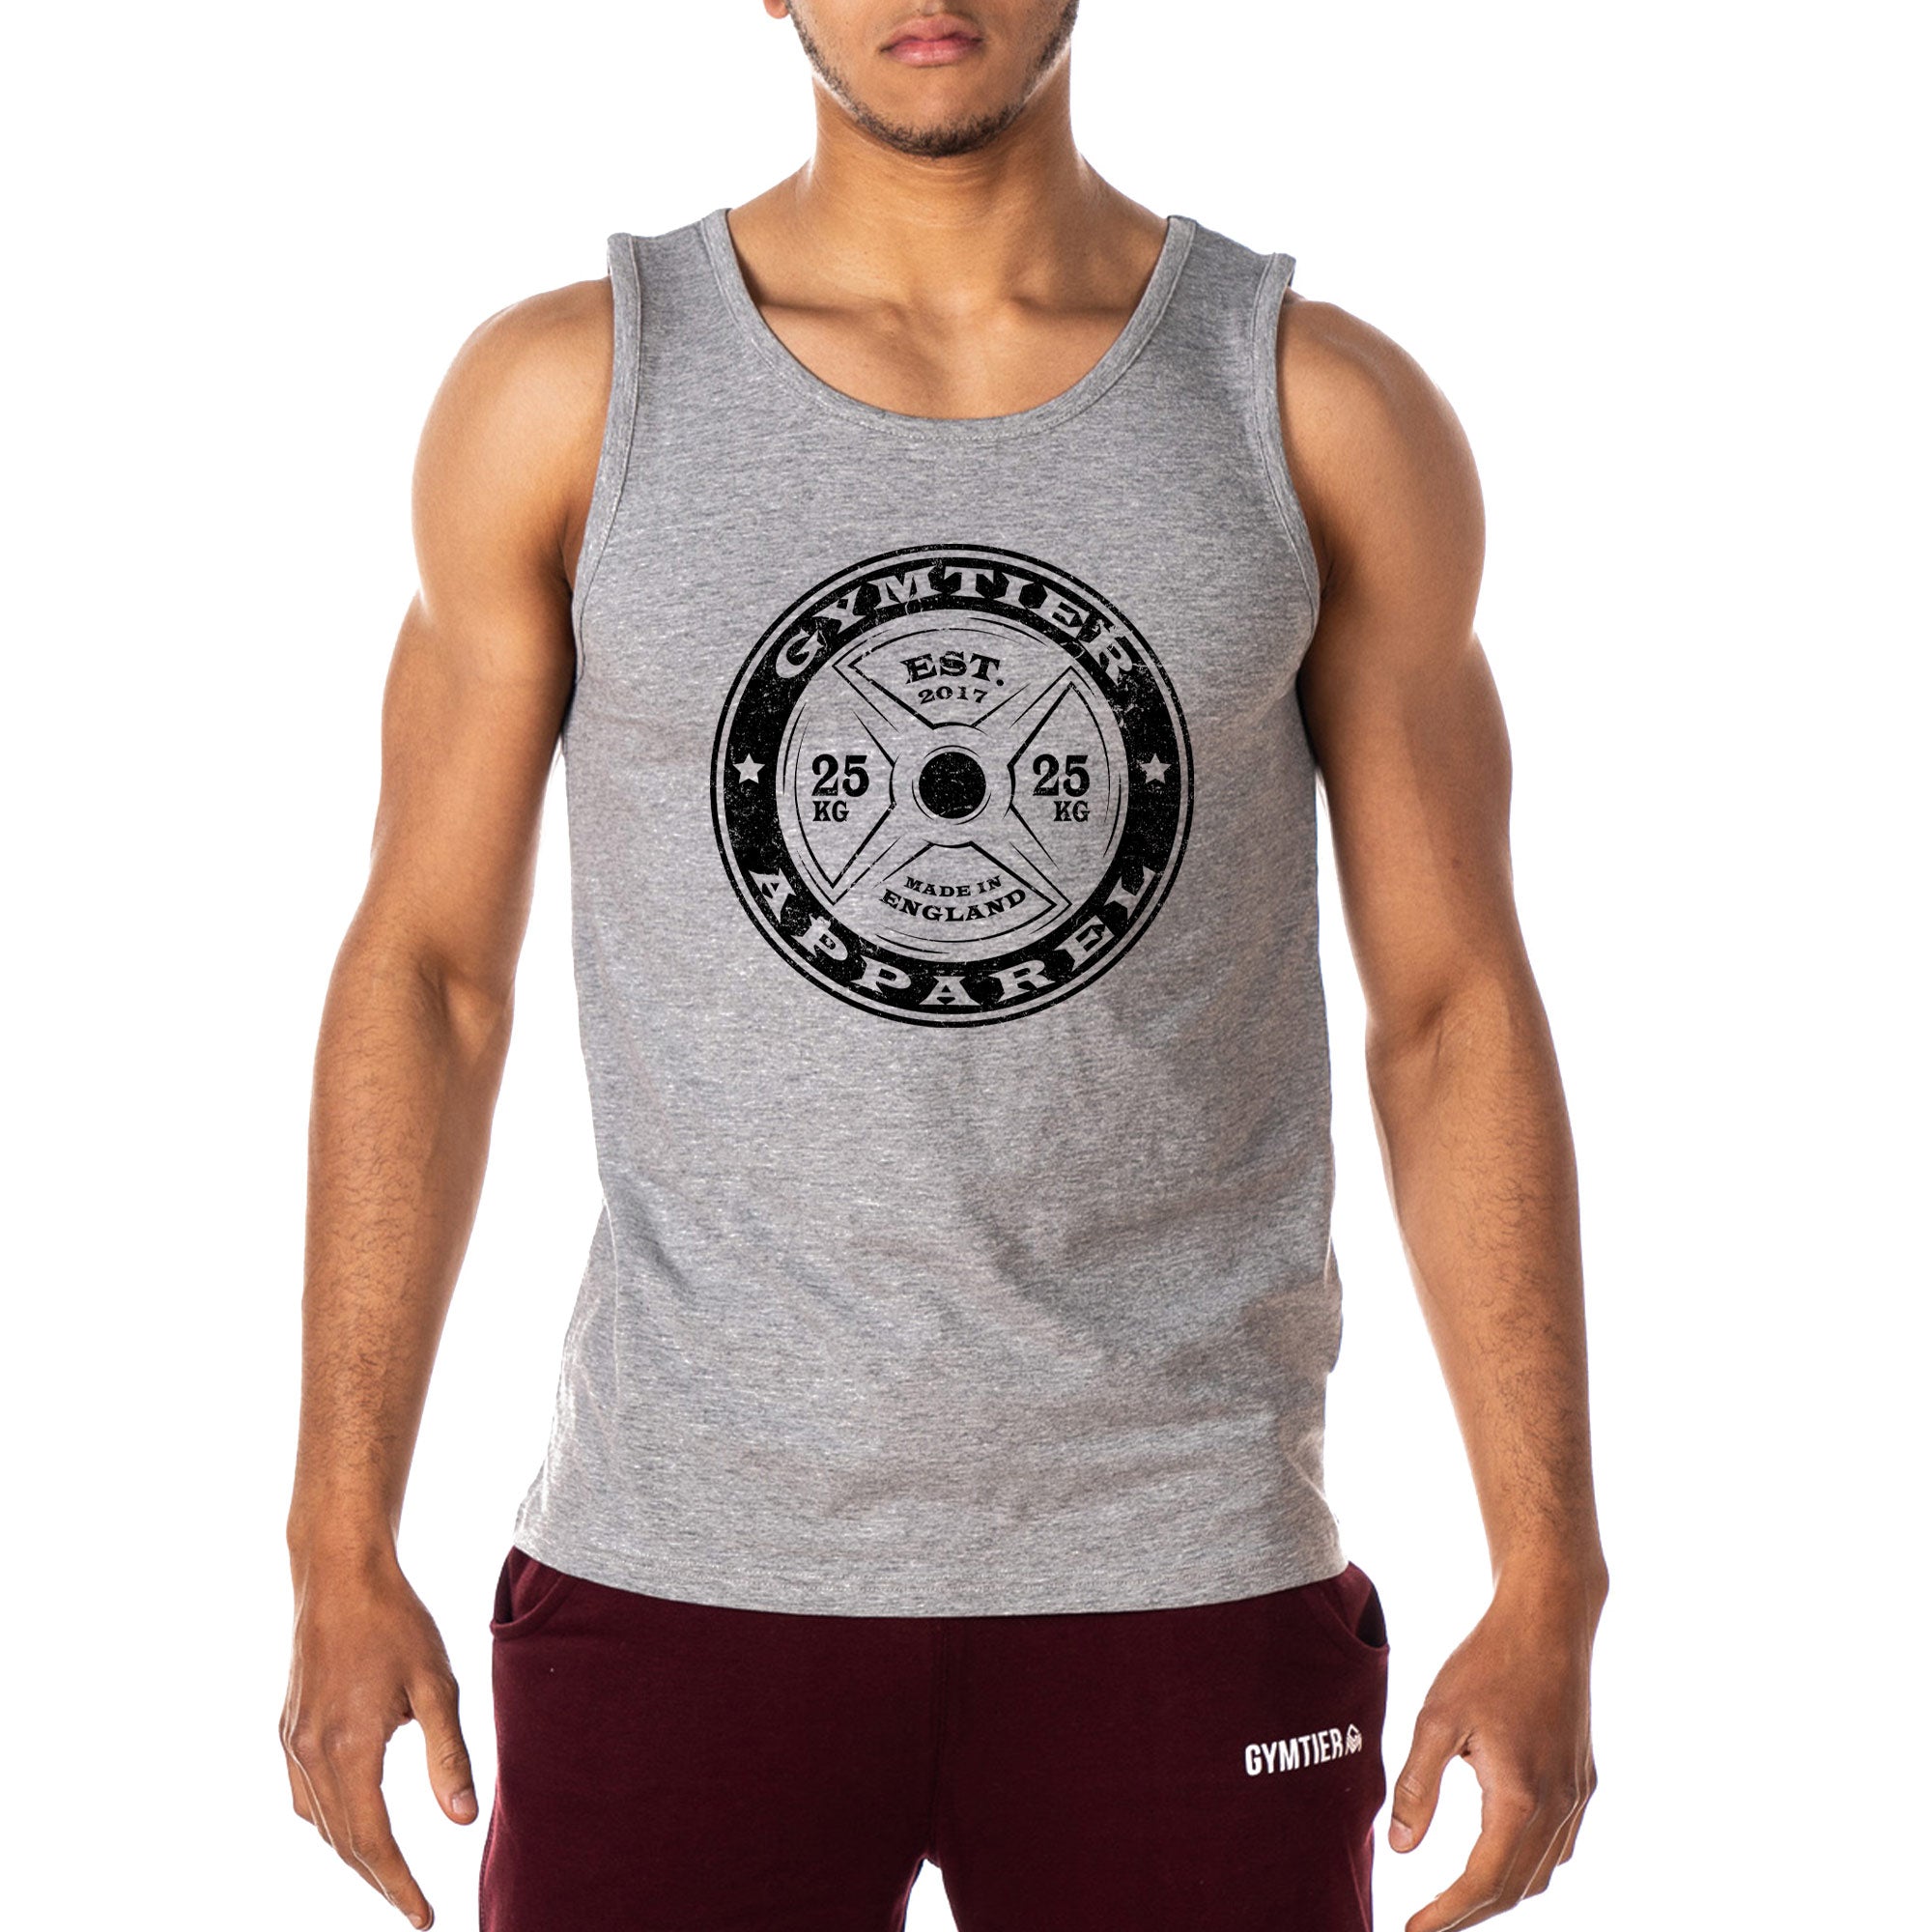 GYMTIER Barbell Gym Vest